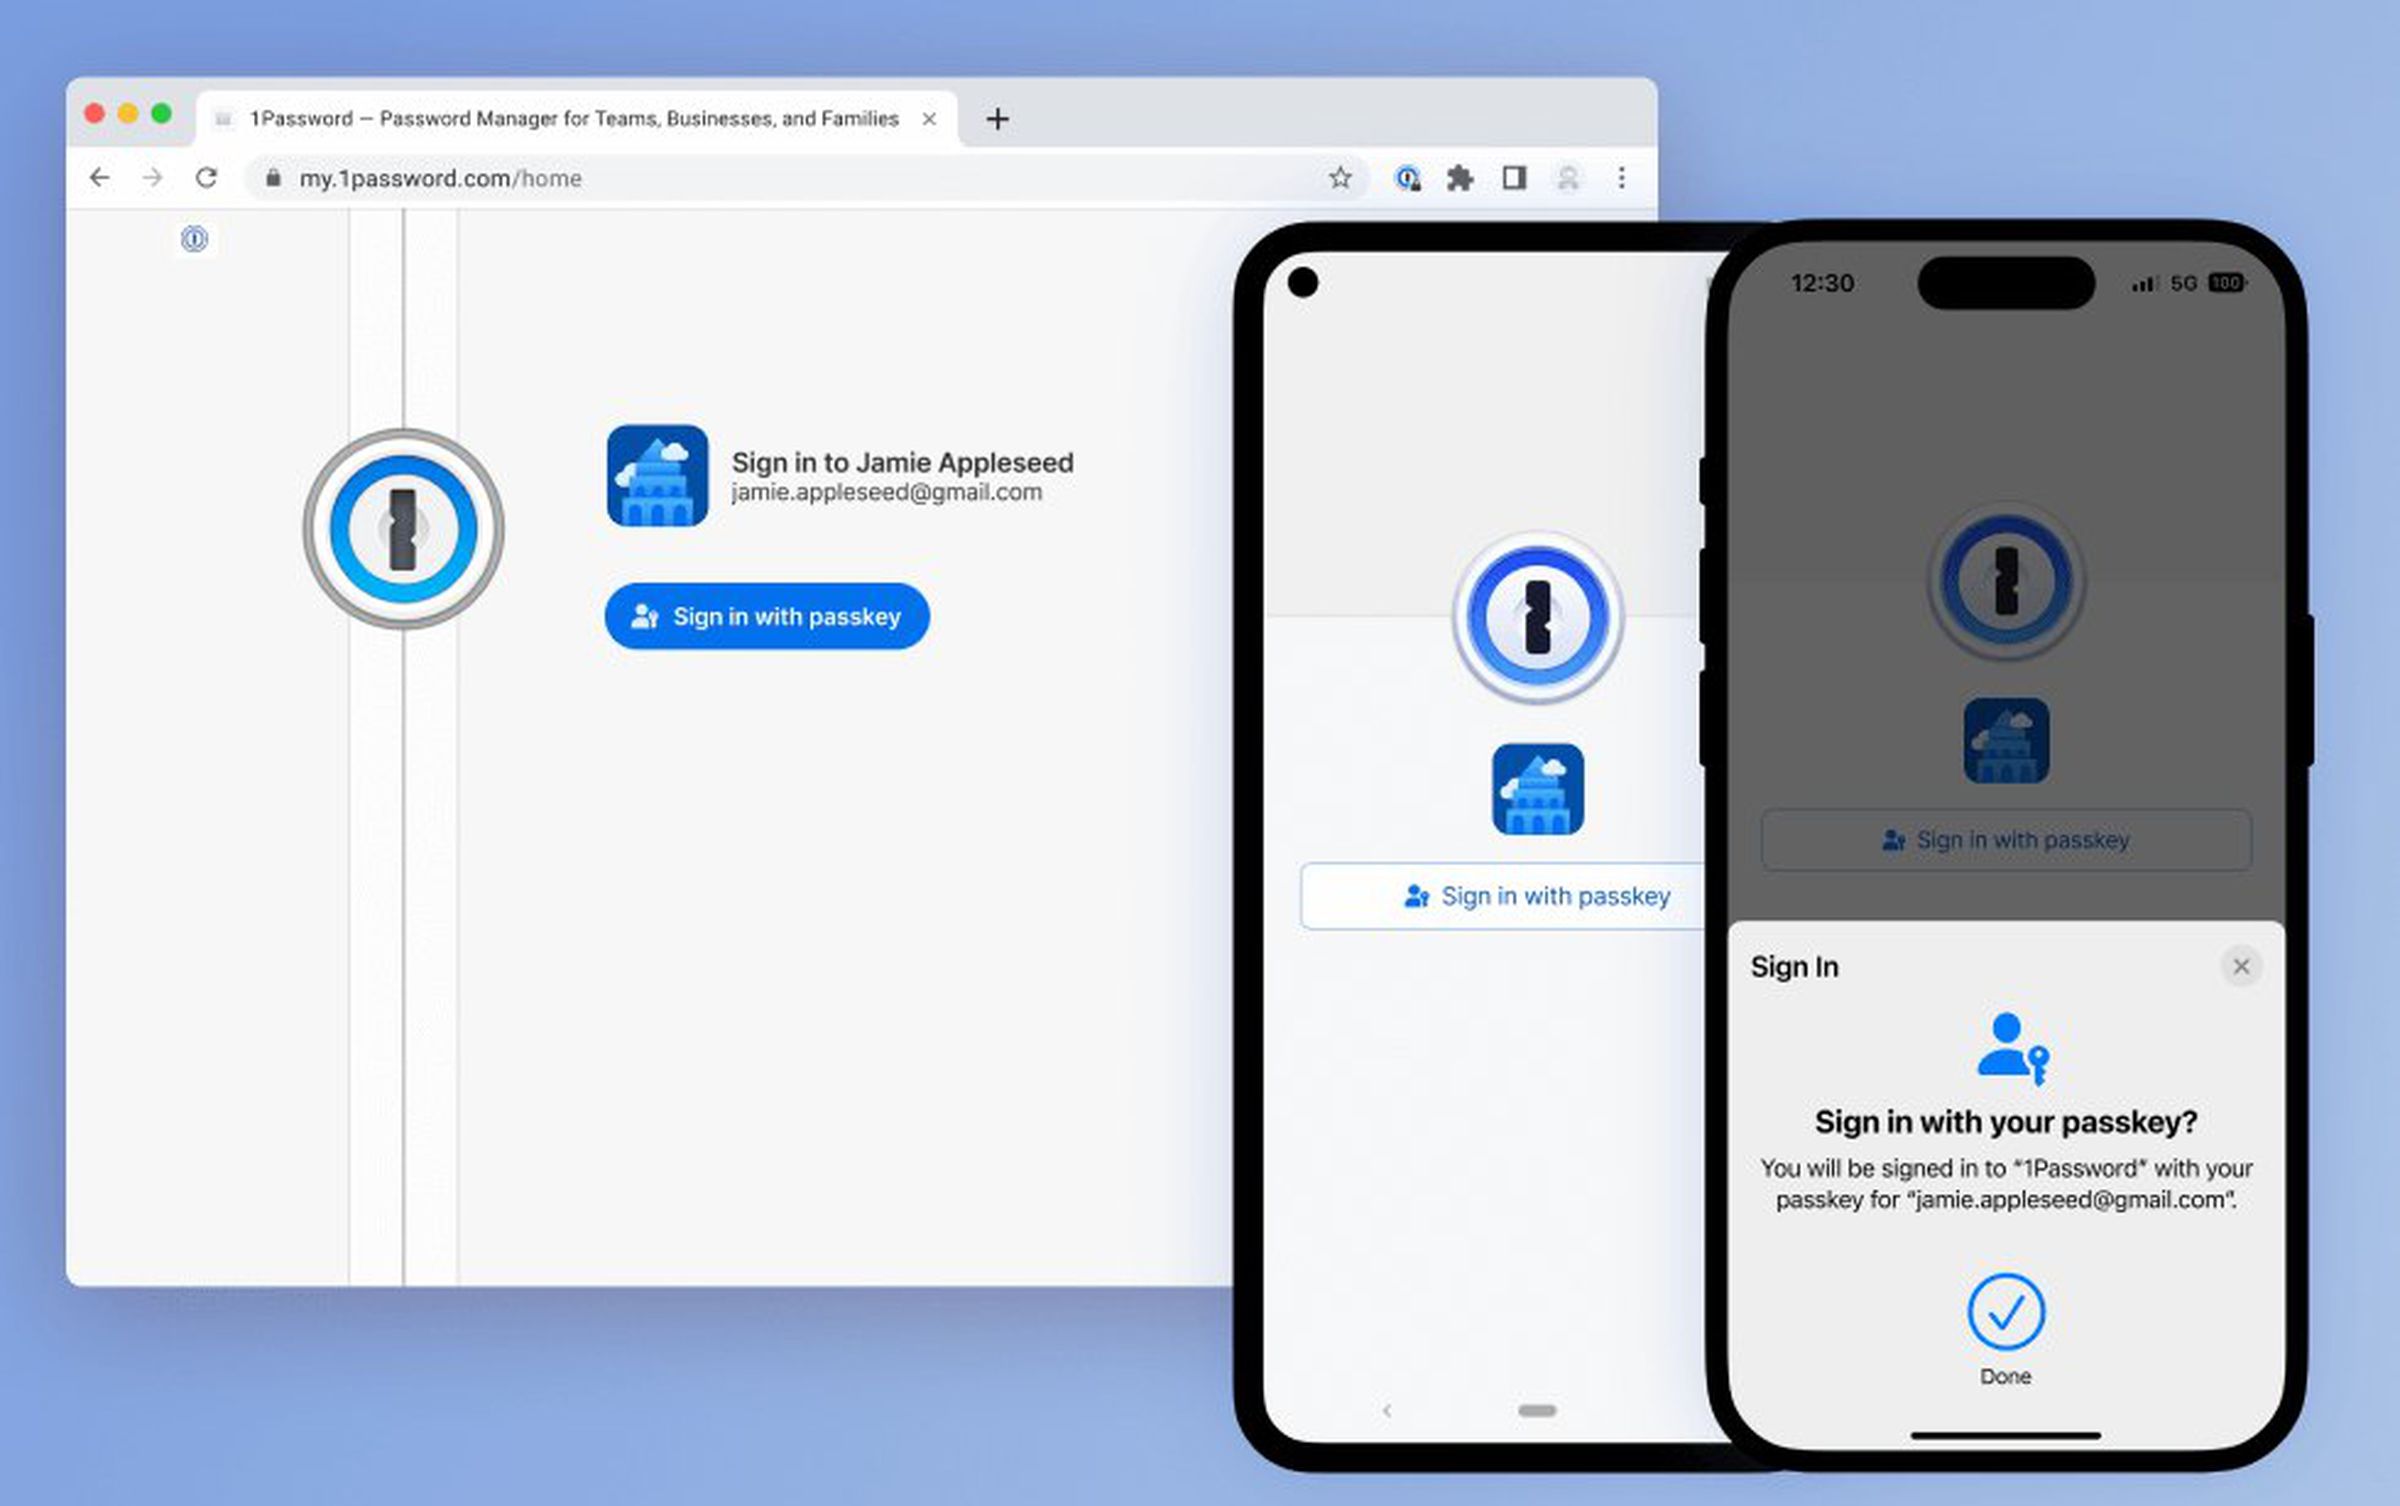 Screenshot of 1Password sign-in screen prompting for a passkey login on the web and on mobile devices.